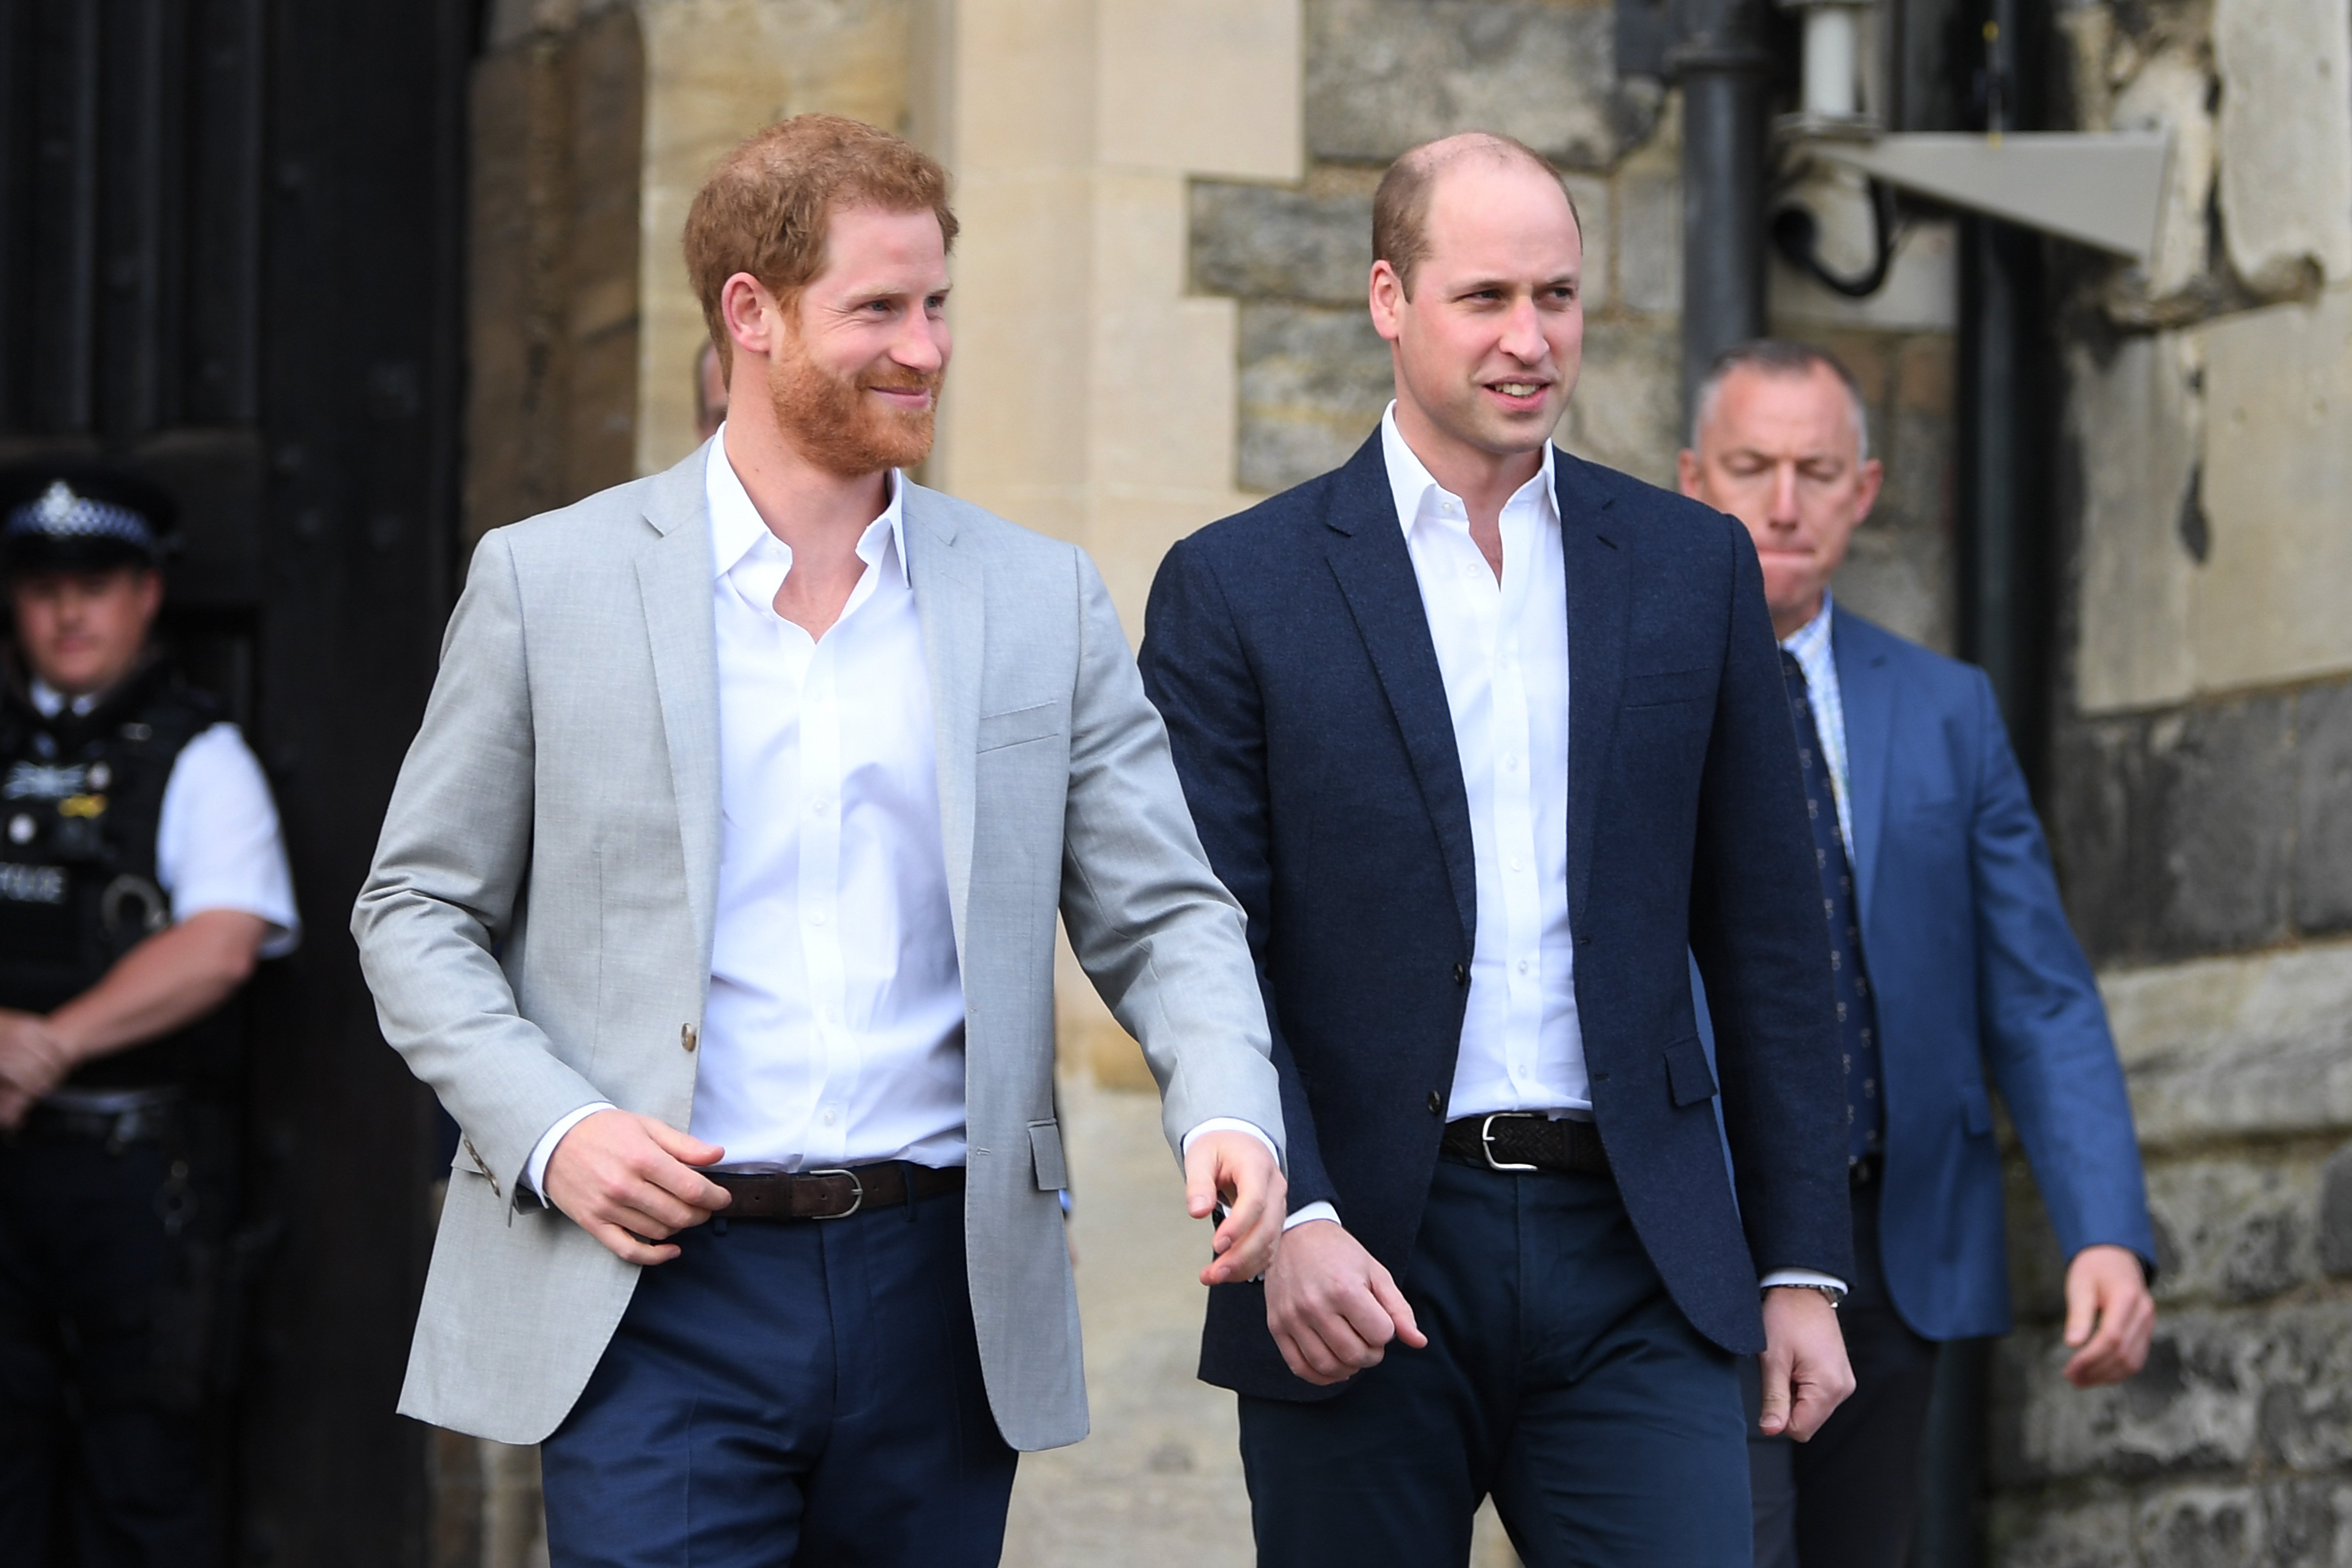 Prince Harry and Prince William, Duke of Cambridge embark on a walkabout ahead of the royal wedding of Prince Harry and Meghan Markle on May 18, 2018 in Windsor, England. | Source: Getty Images